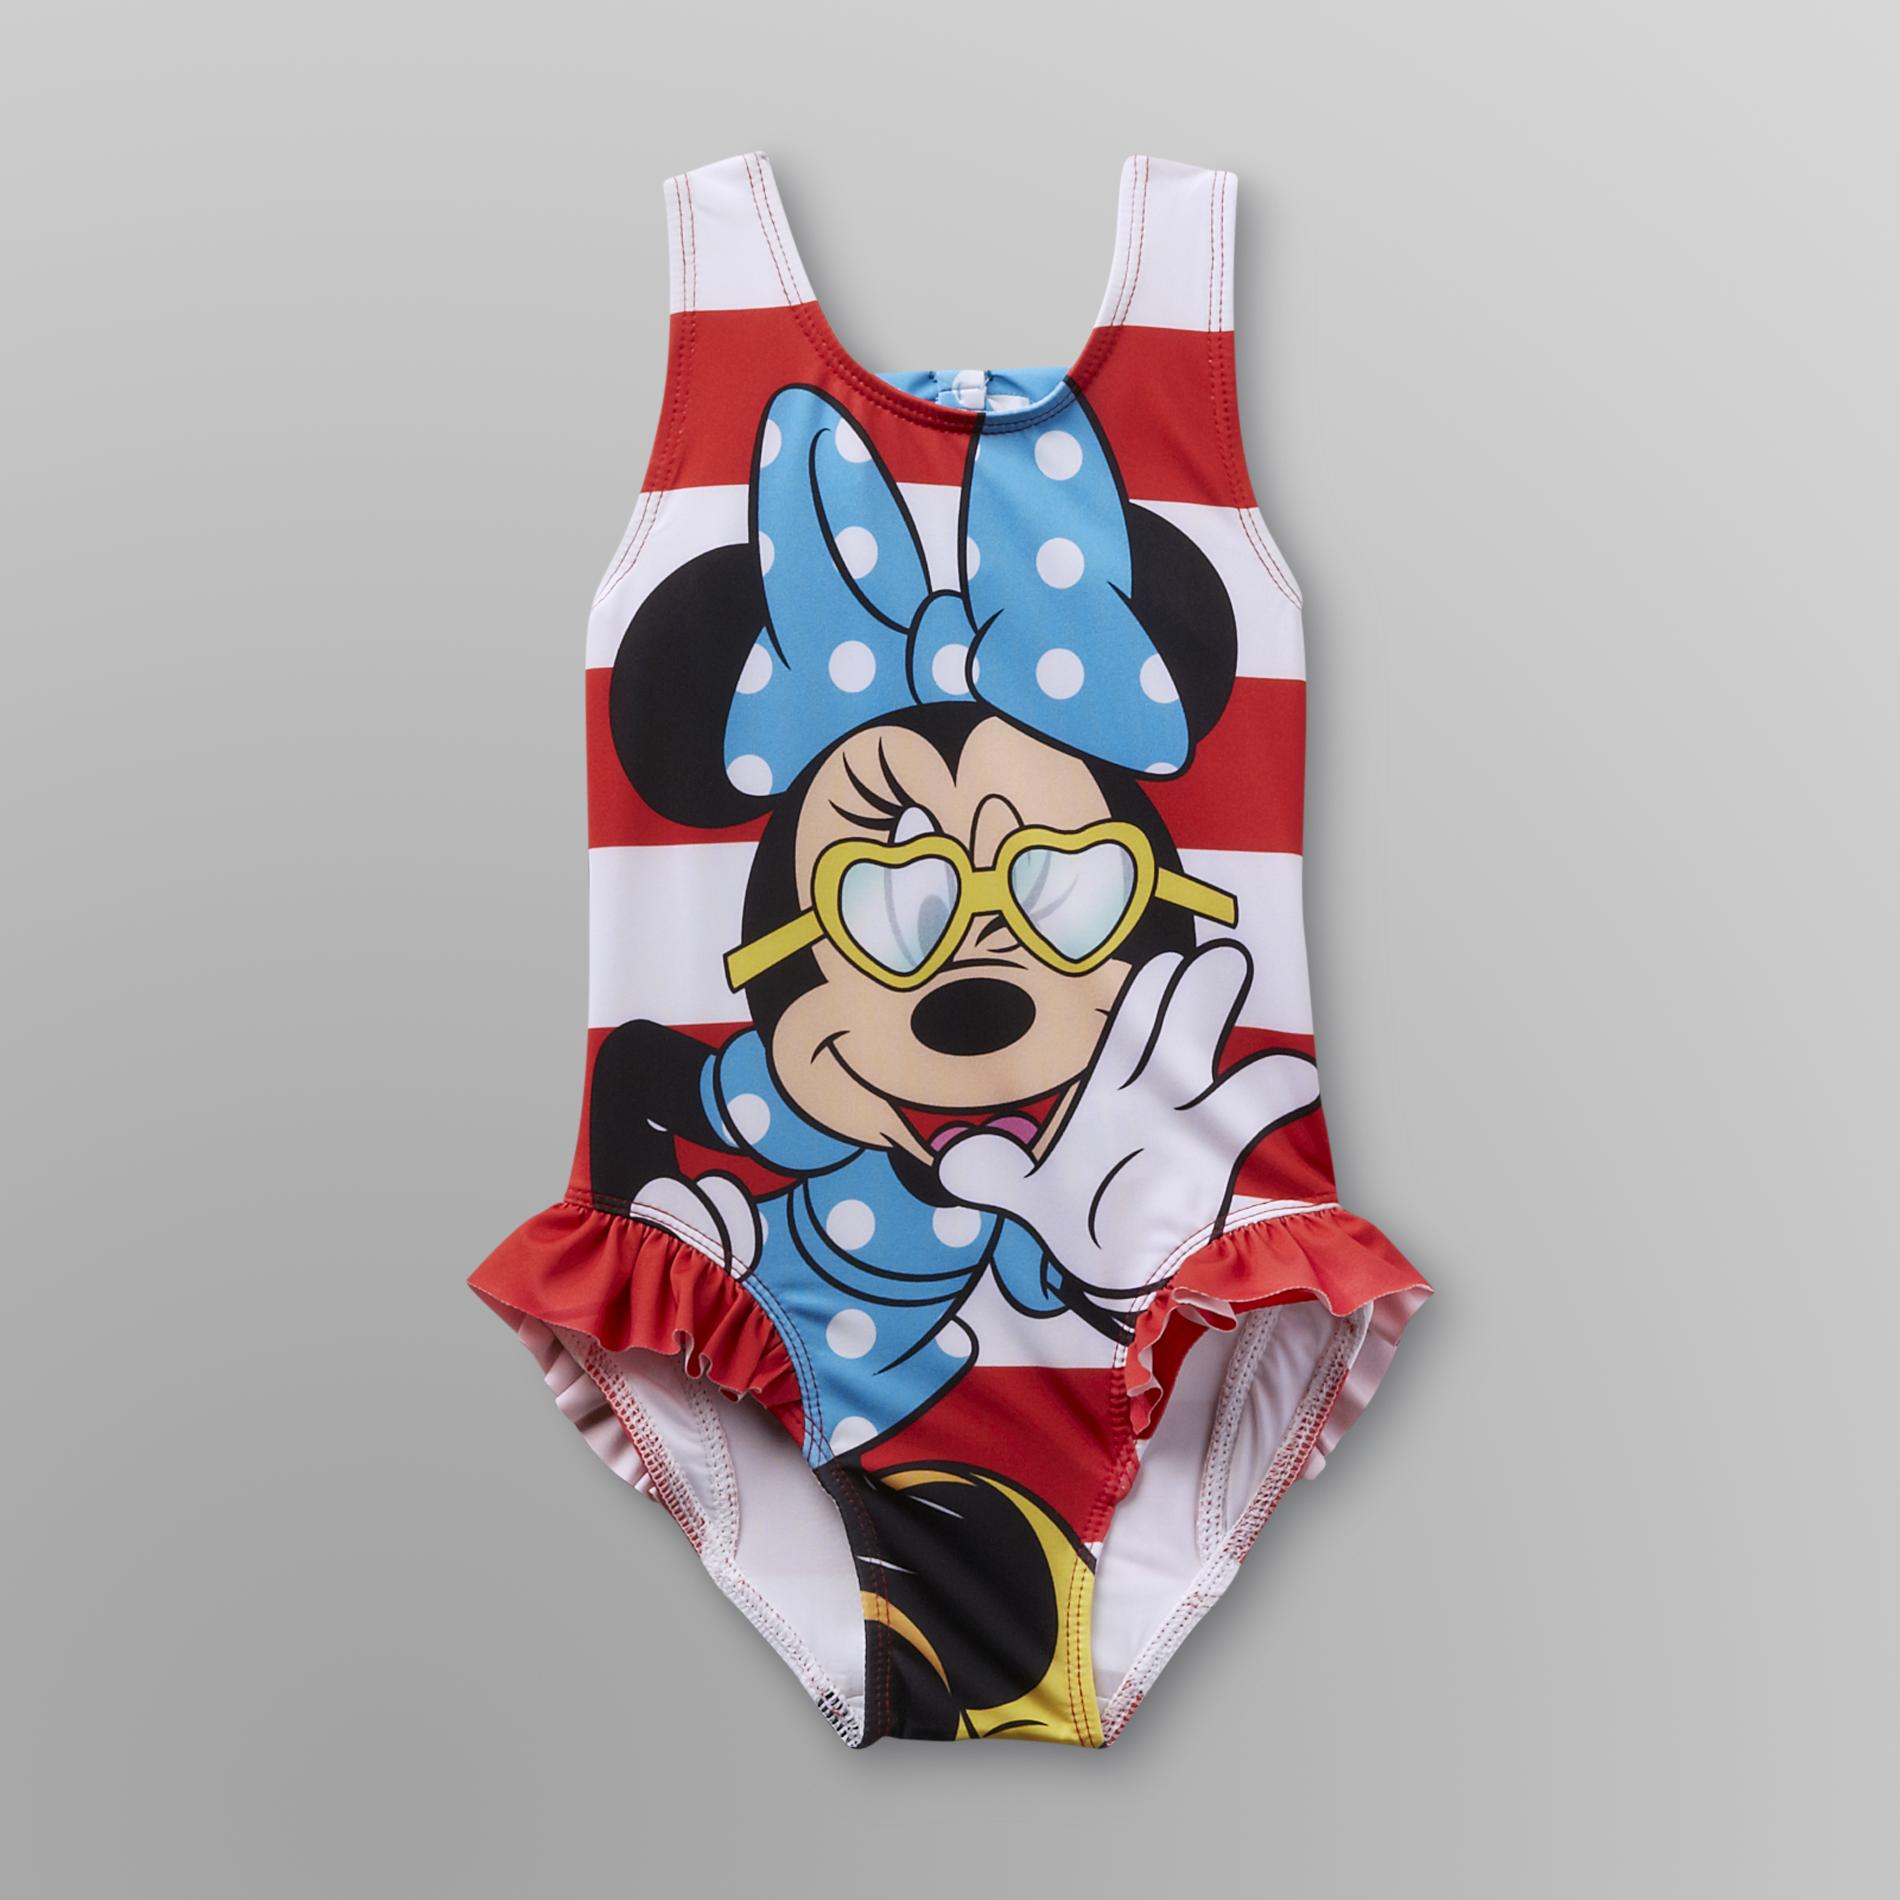 Disney Minnie Mouse Infant & Toddler Girl's Swimsuit - Striped